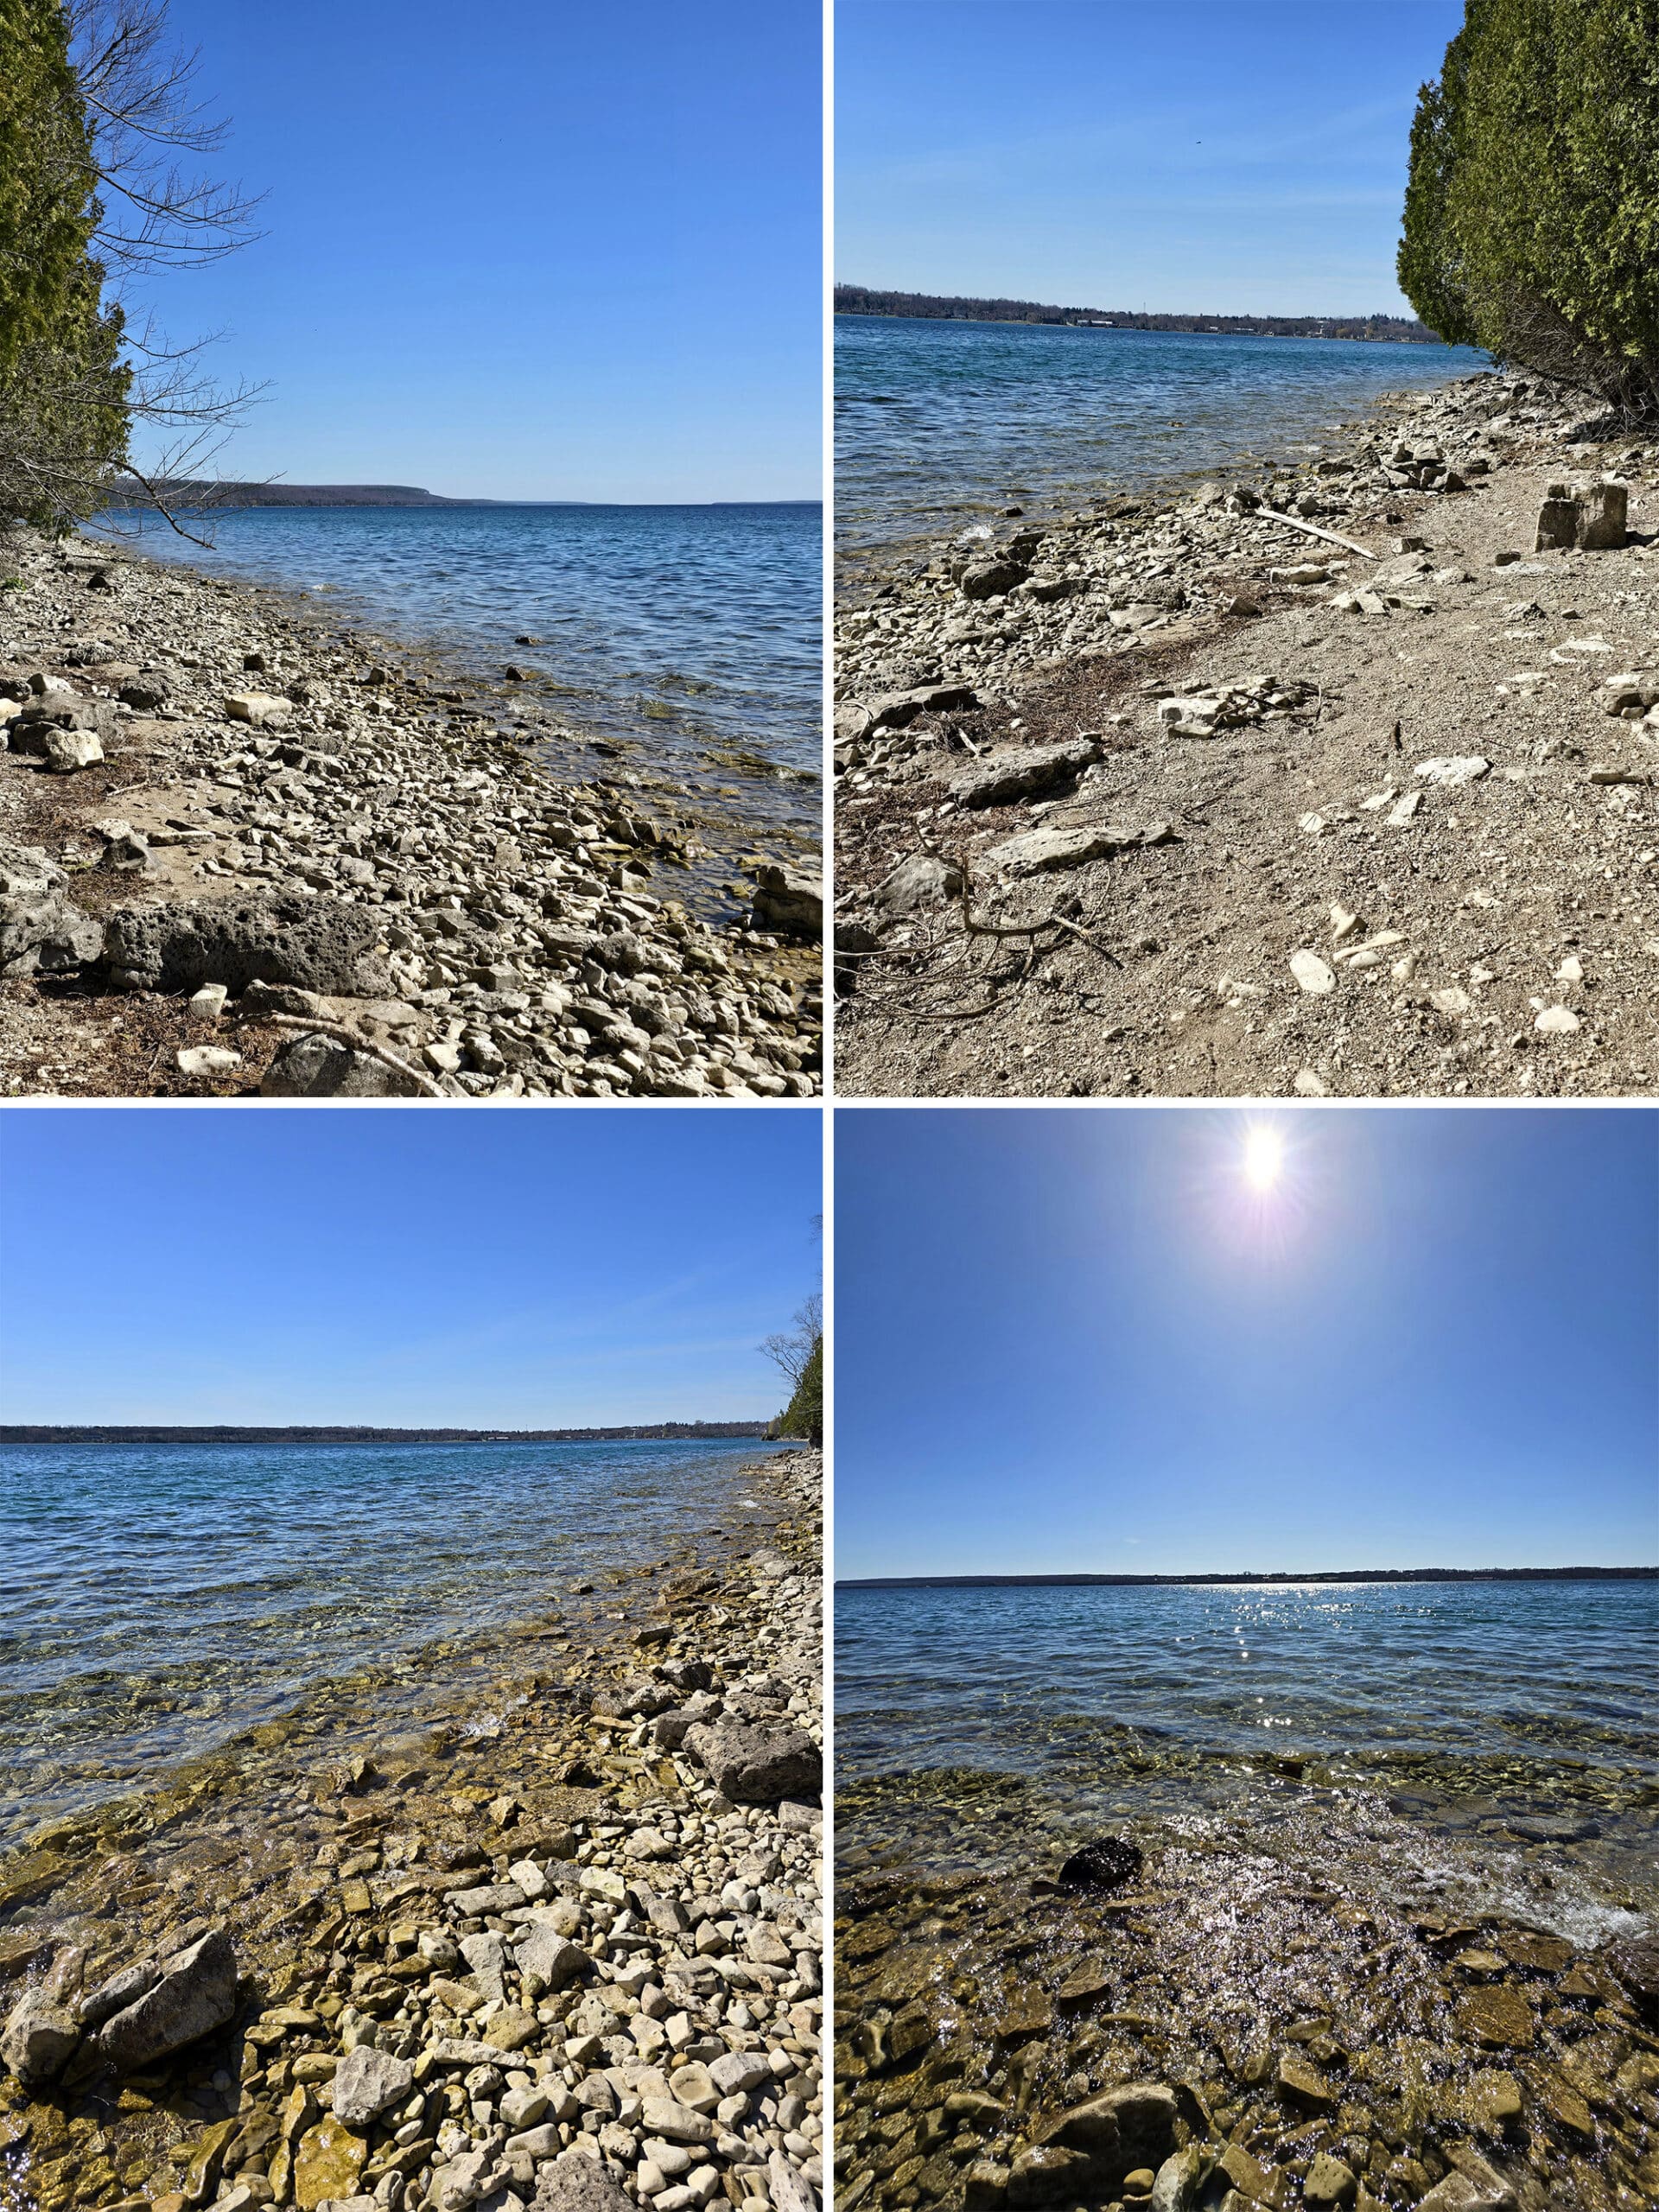 4 part image showing a rocky beach and blue water on a bright sunny day.